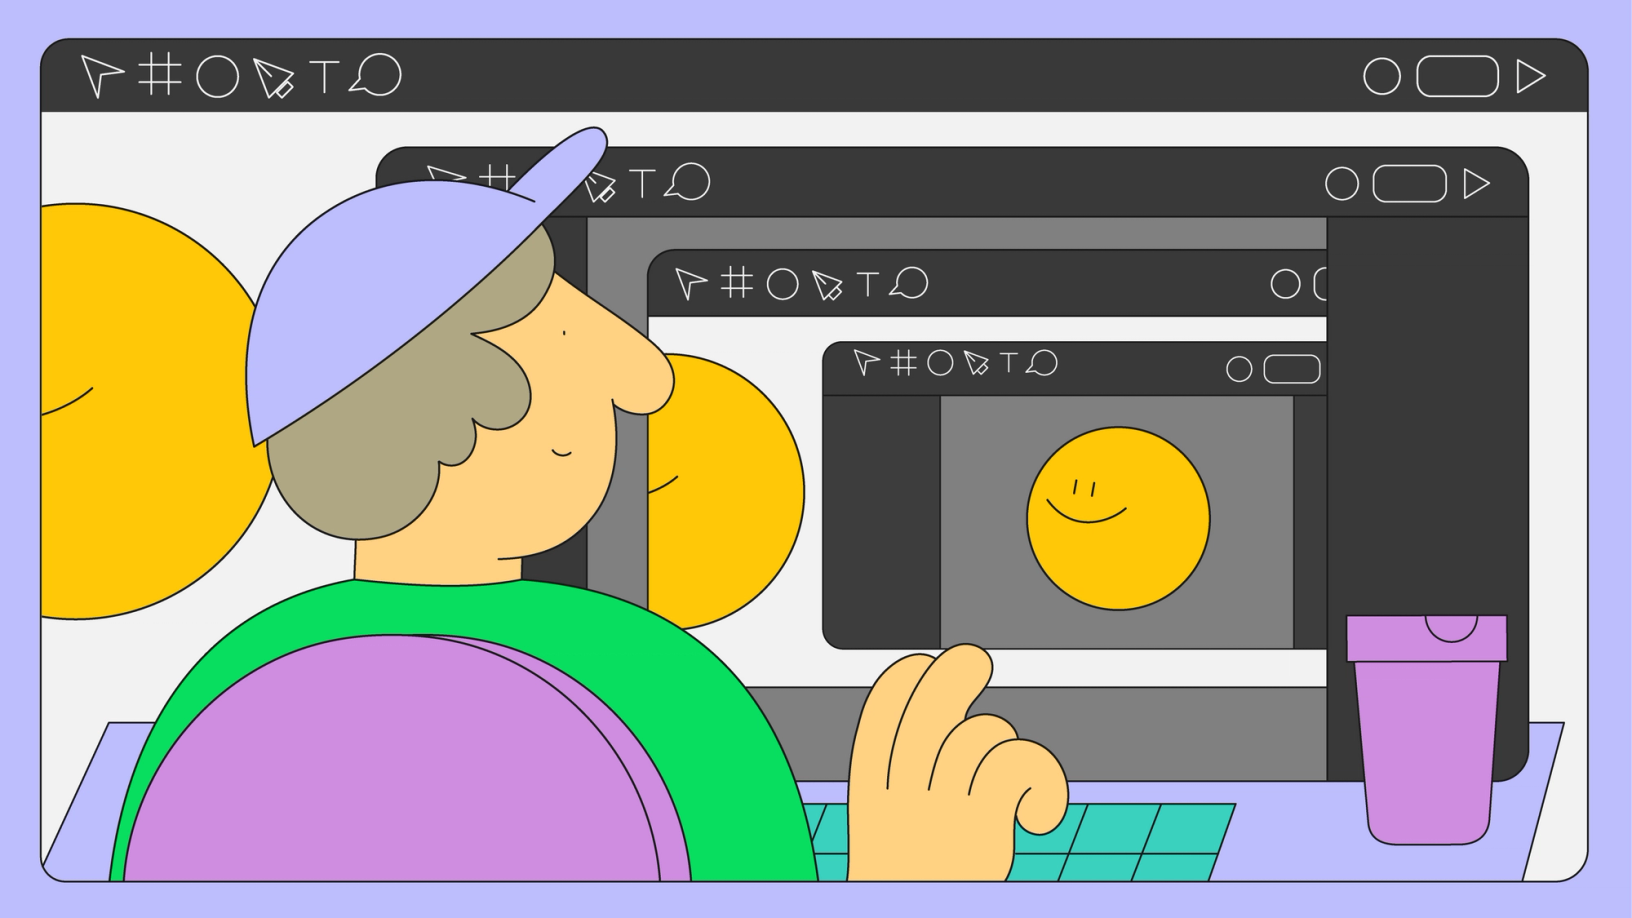 person in baseball cap on a cascading series of computer screens with a yellow circle smiling back at them